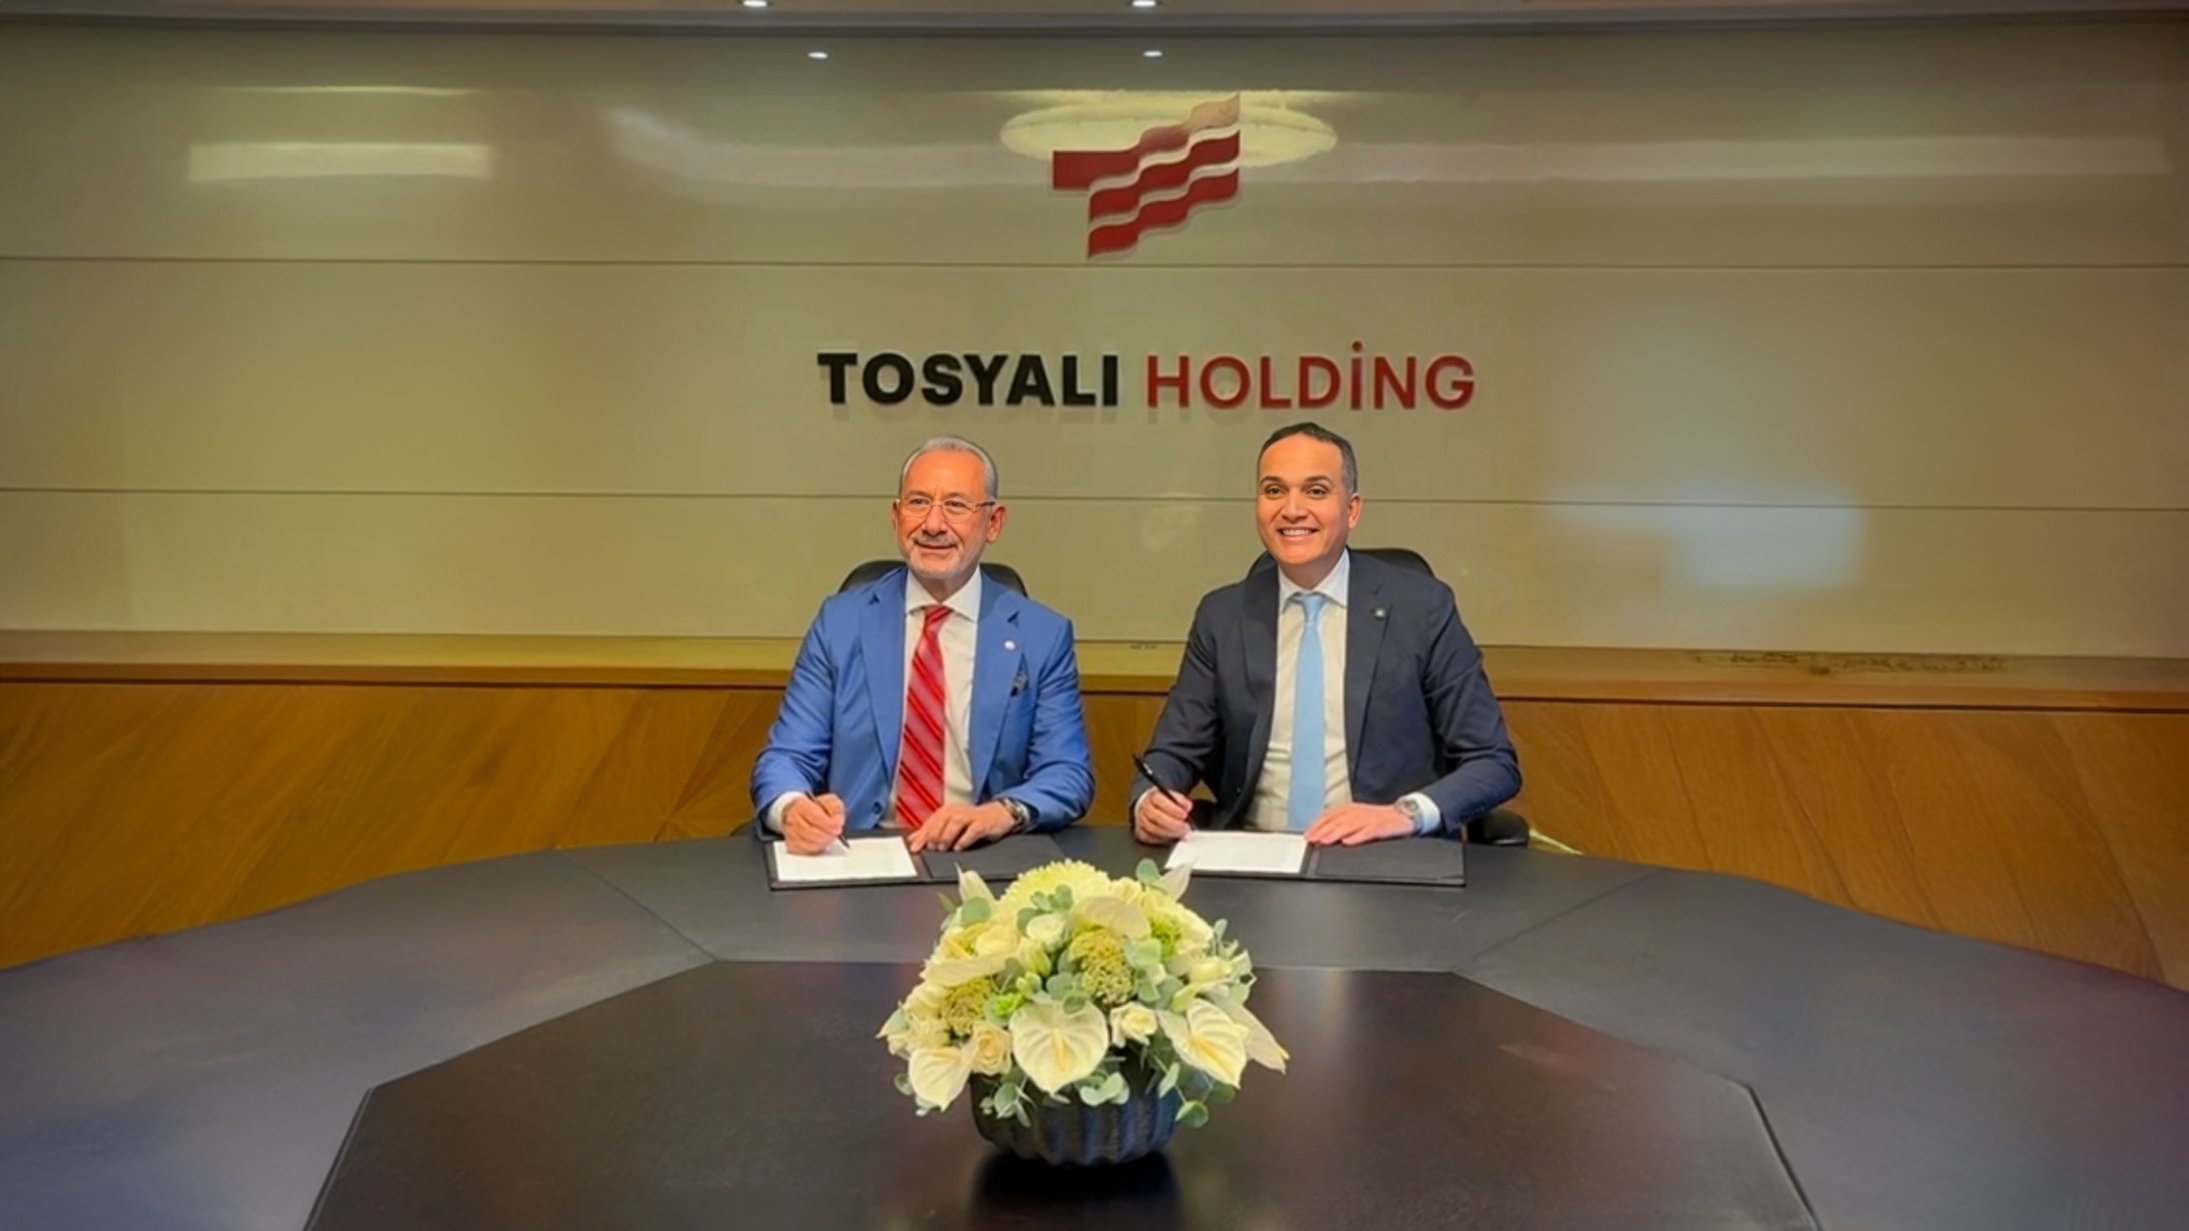 Tosyali SULB started the investment of the world’s largest DRI complex in Benghazi / Libya